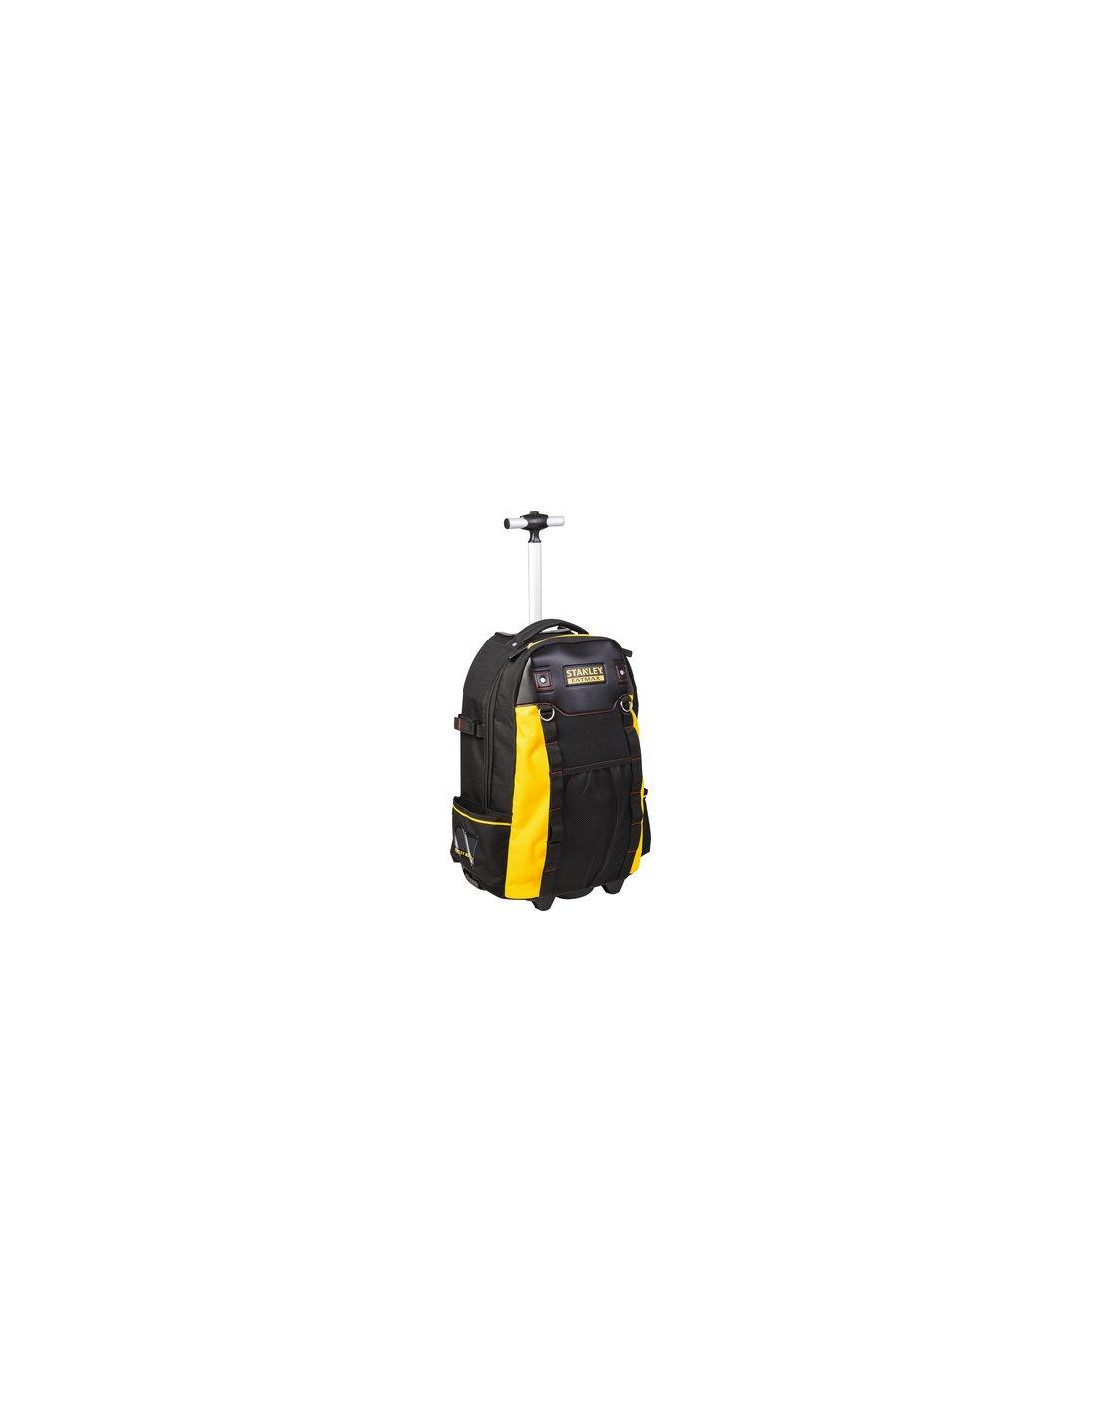 SAC A DOS A ROULETTES FATMAX STANLEY 1-79-215